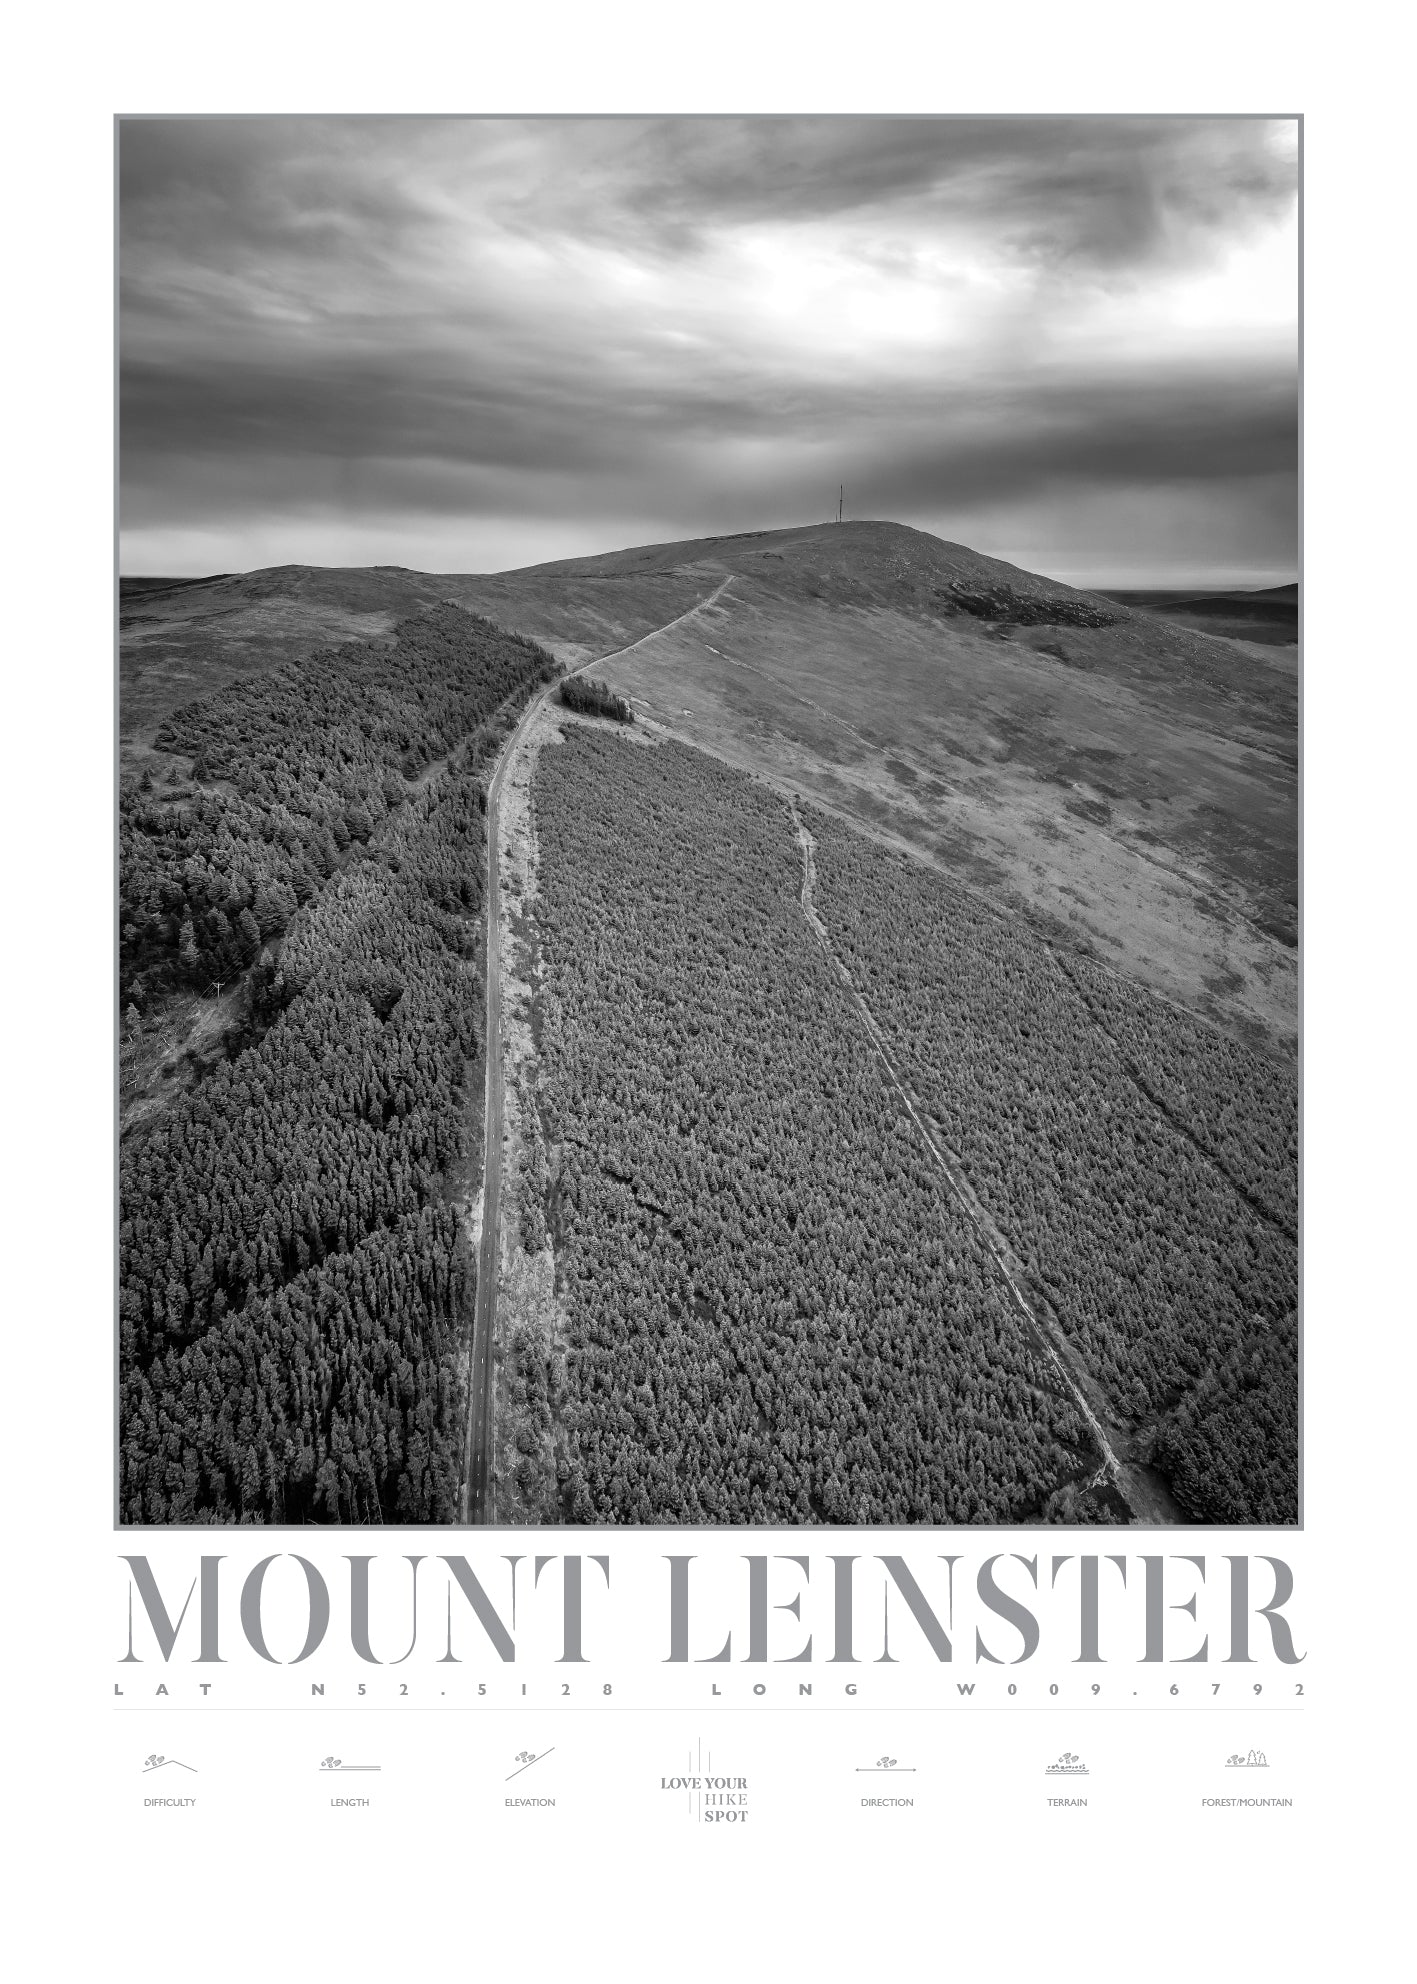 MOUNT LEINSTER CO WEXFORD